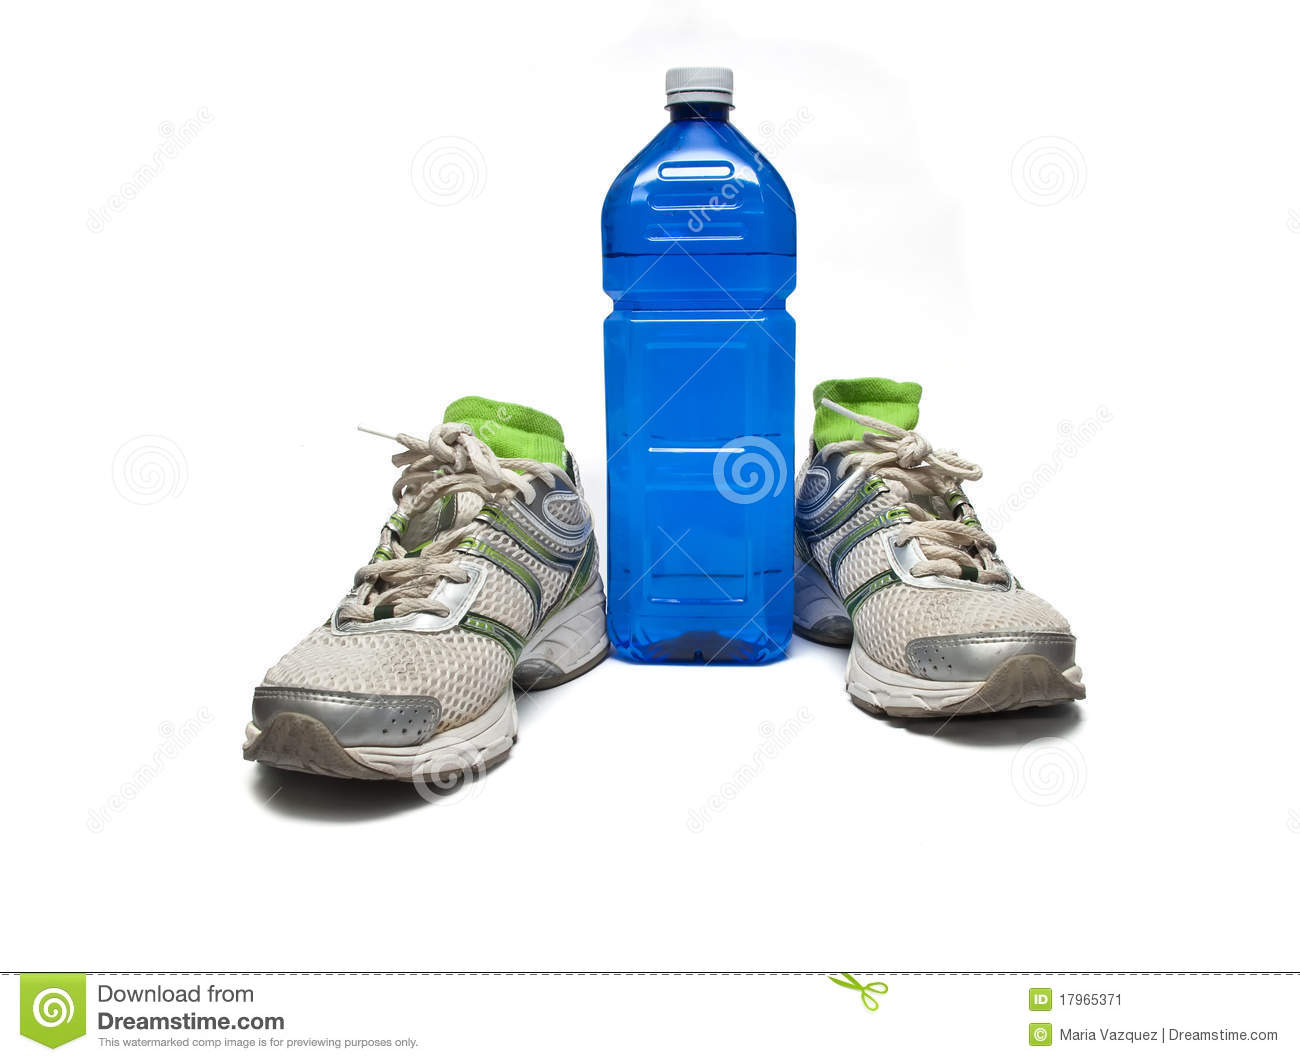 Shoes And Water Bottle Stock Image   Image  17965371